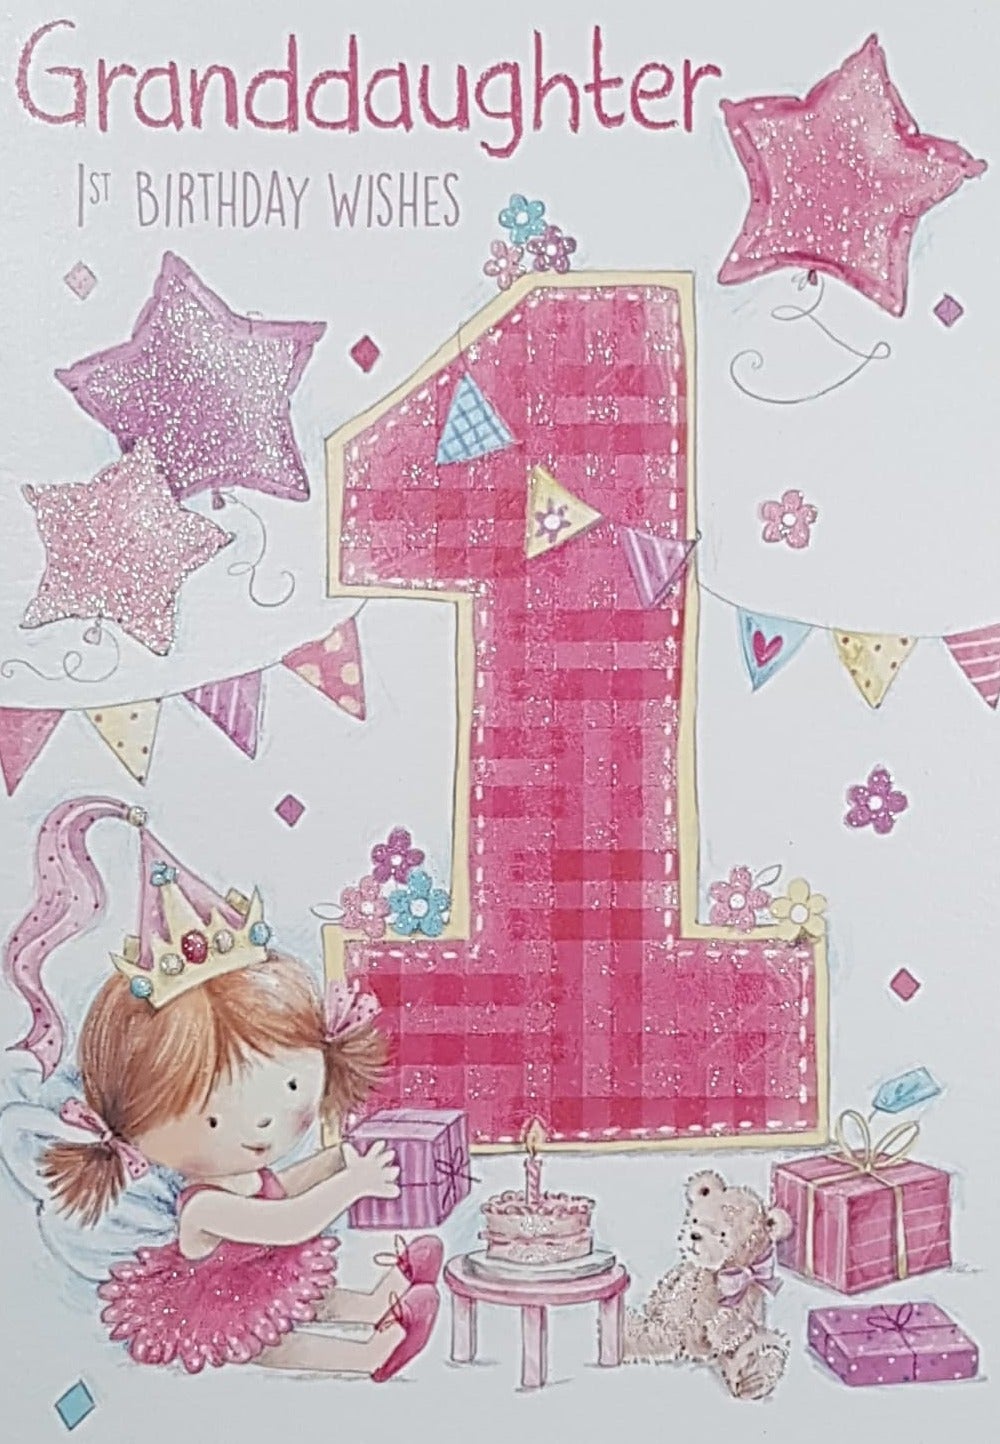 Age 1 Birthday Card - Granddaughter / A Little Girl In A Pink Dress Opening A Purple Gift